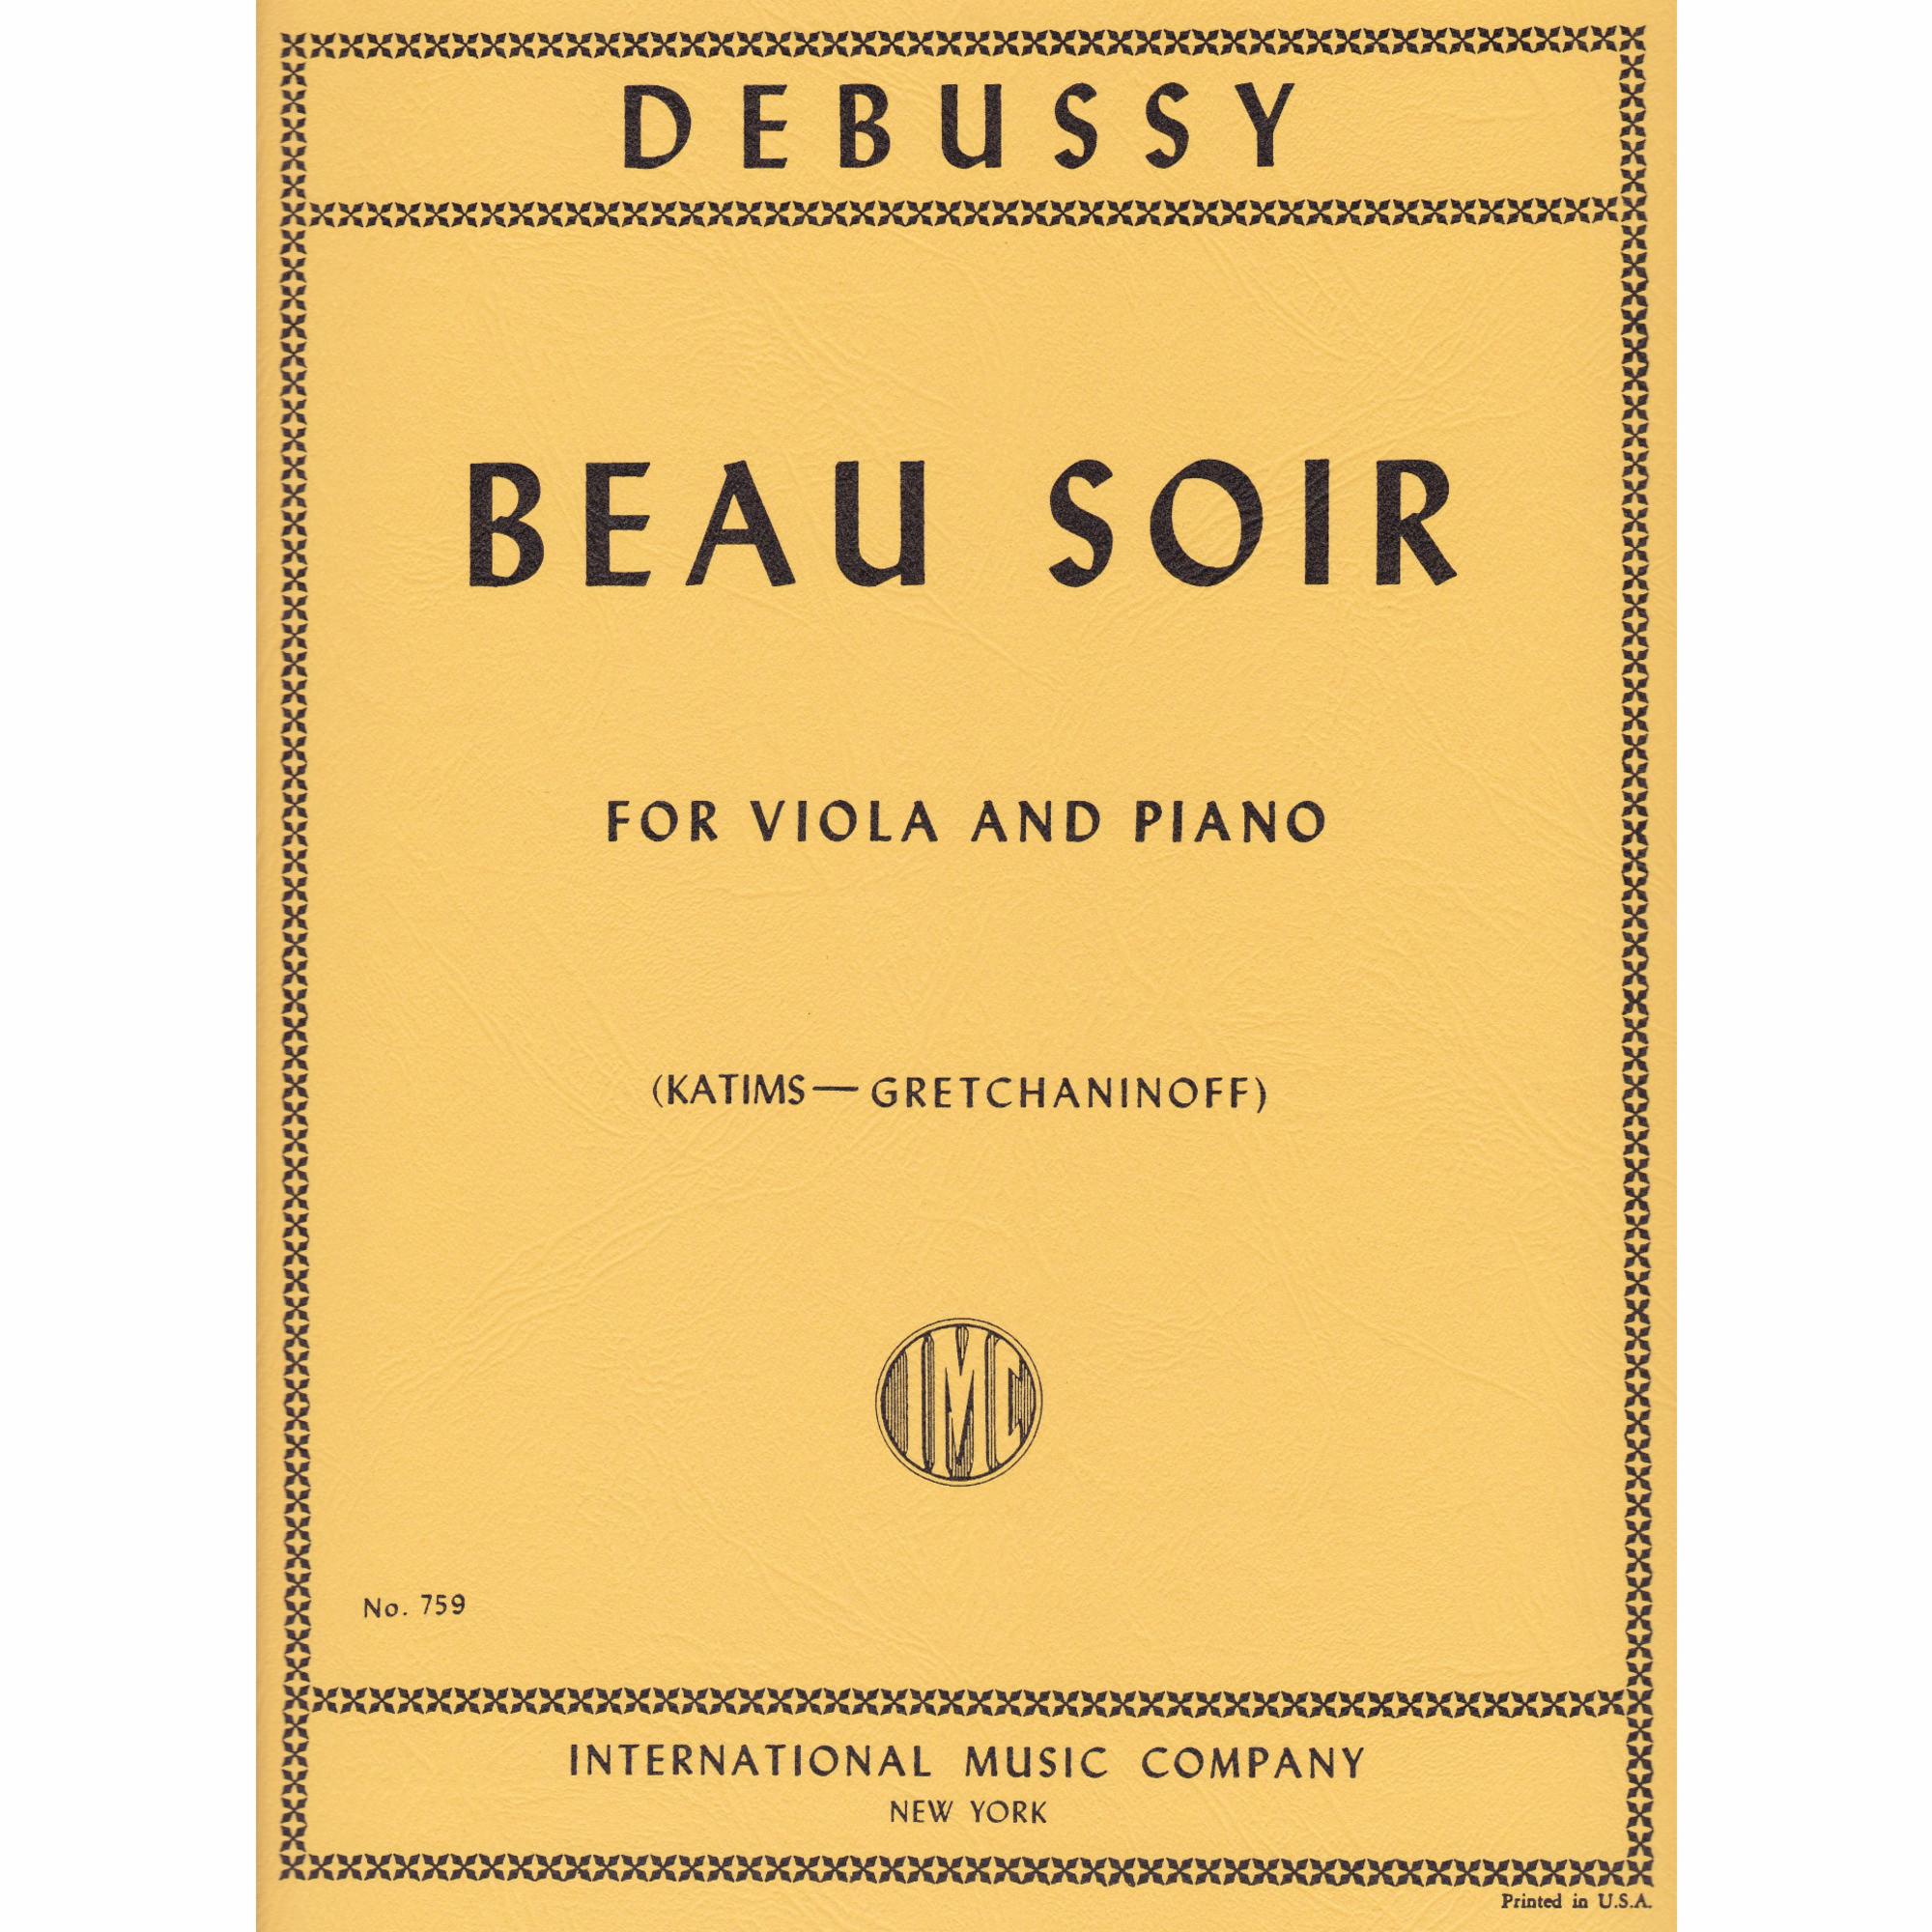 Beau Soir for Viola and Piano